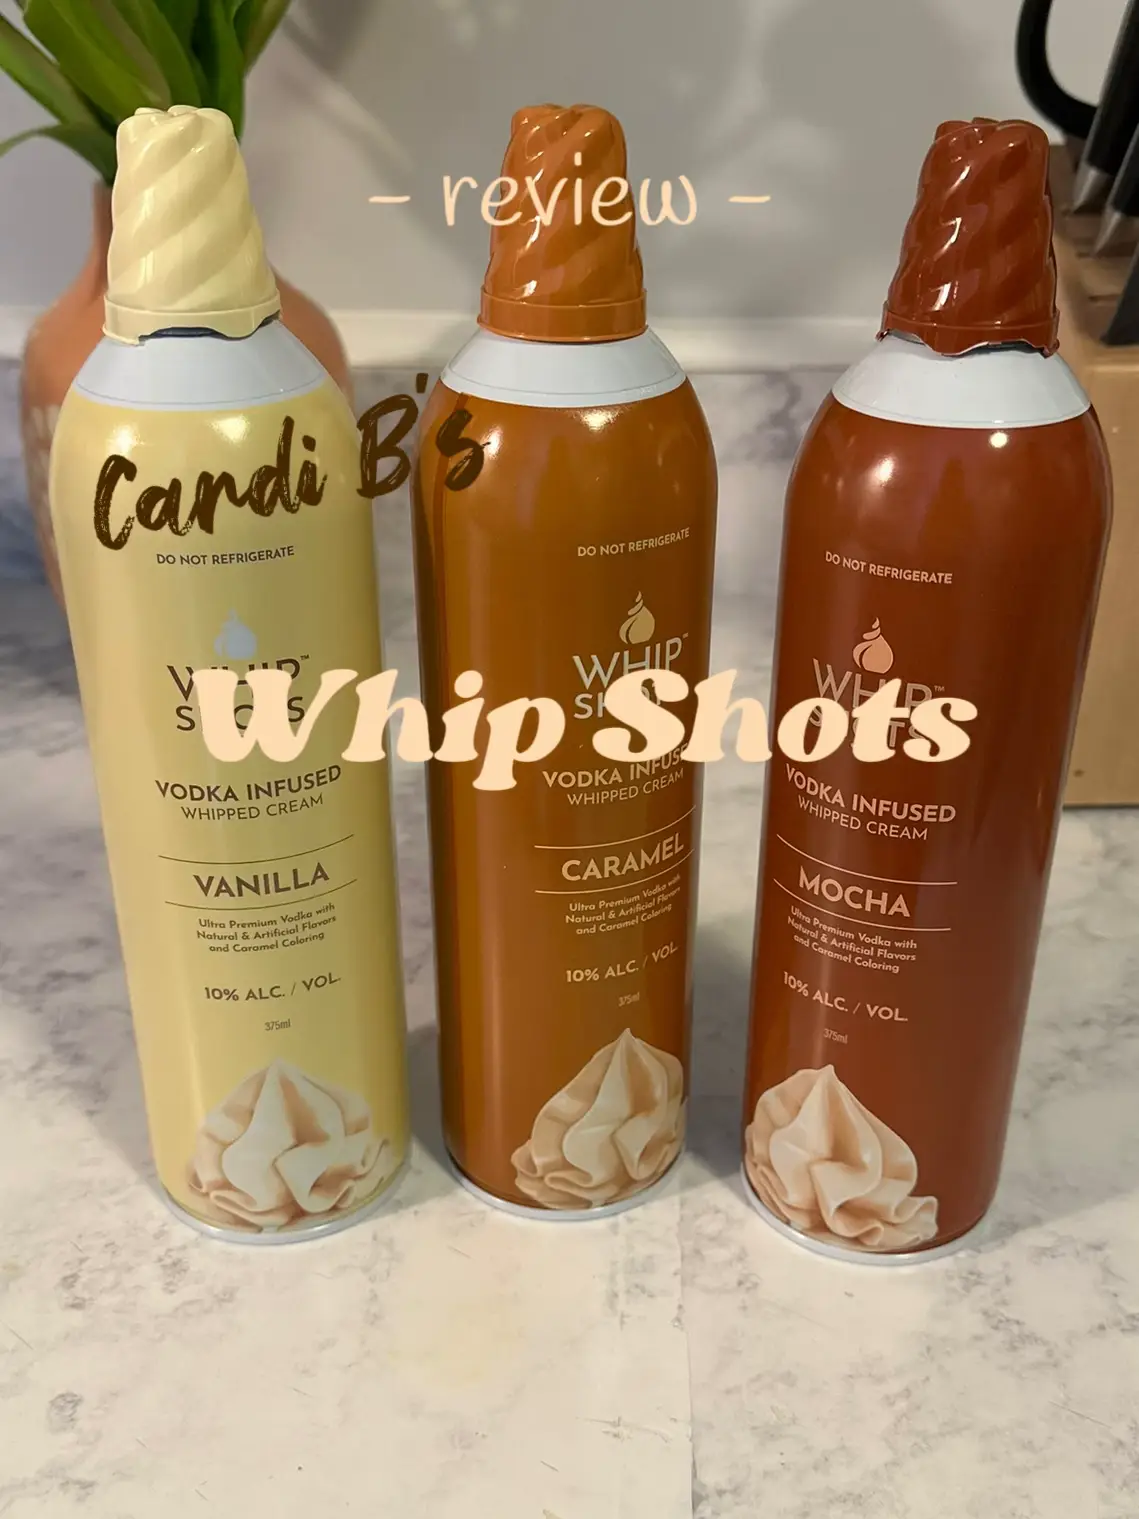 Cardi B's Whipshots Taste As Good As They Look